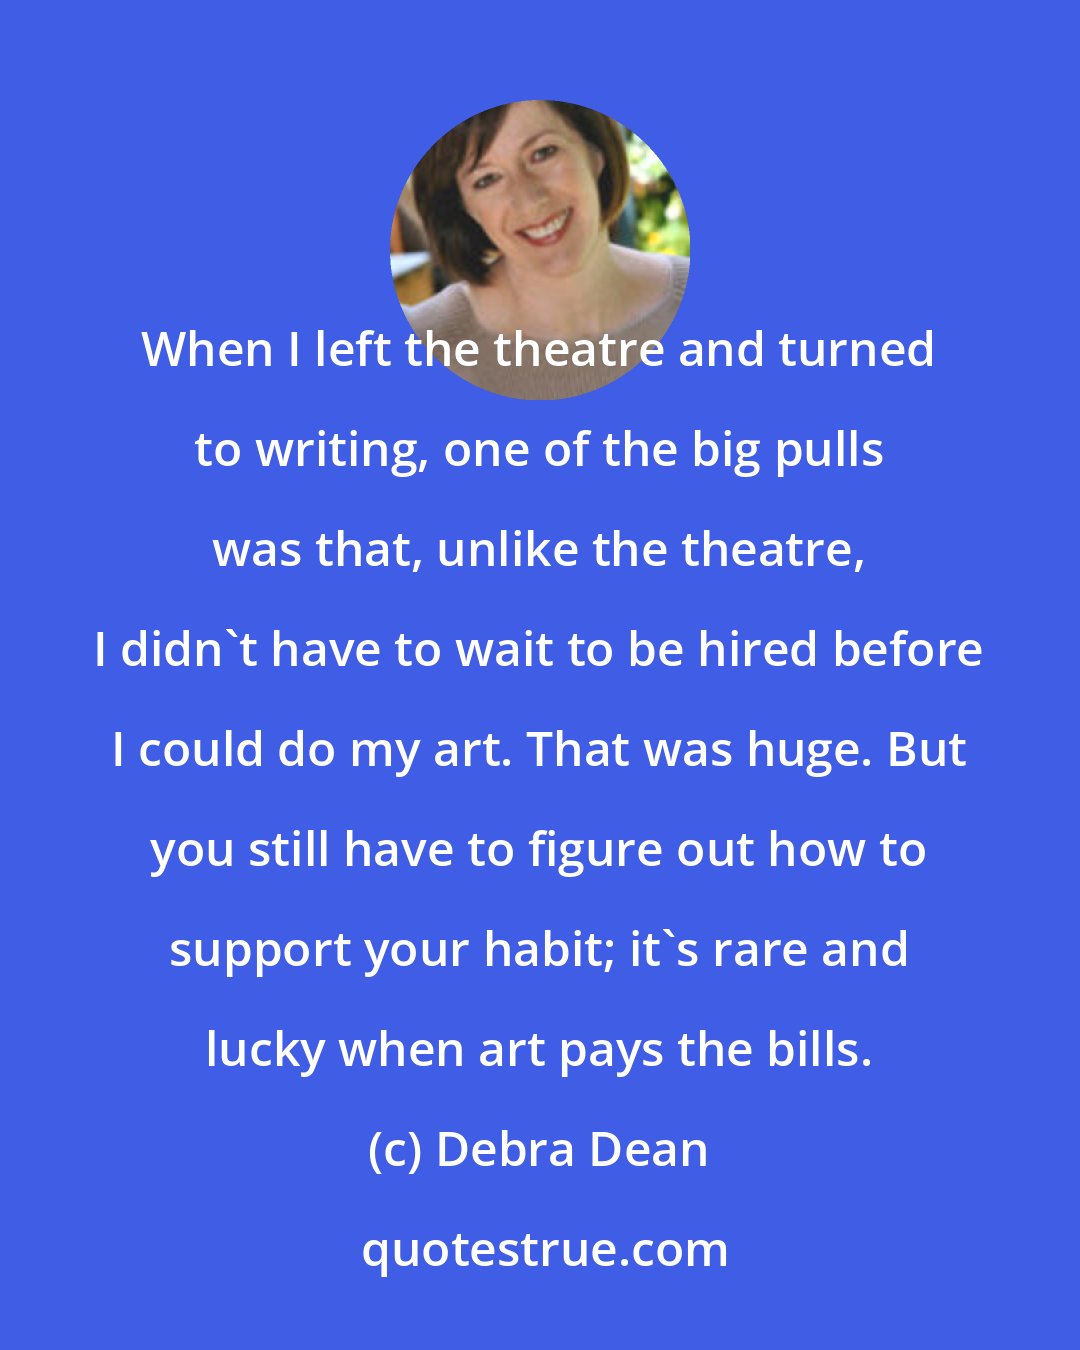 Debra Dean: When I left the theatre and turned to writing, one of the big pulls was that, unlike the theatre, I didn't have to wait to be hired before I could do my art. That was huge. But you still have to figure out how to support your habit; it's rare and lucky when art pays the bills.